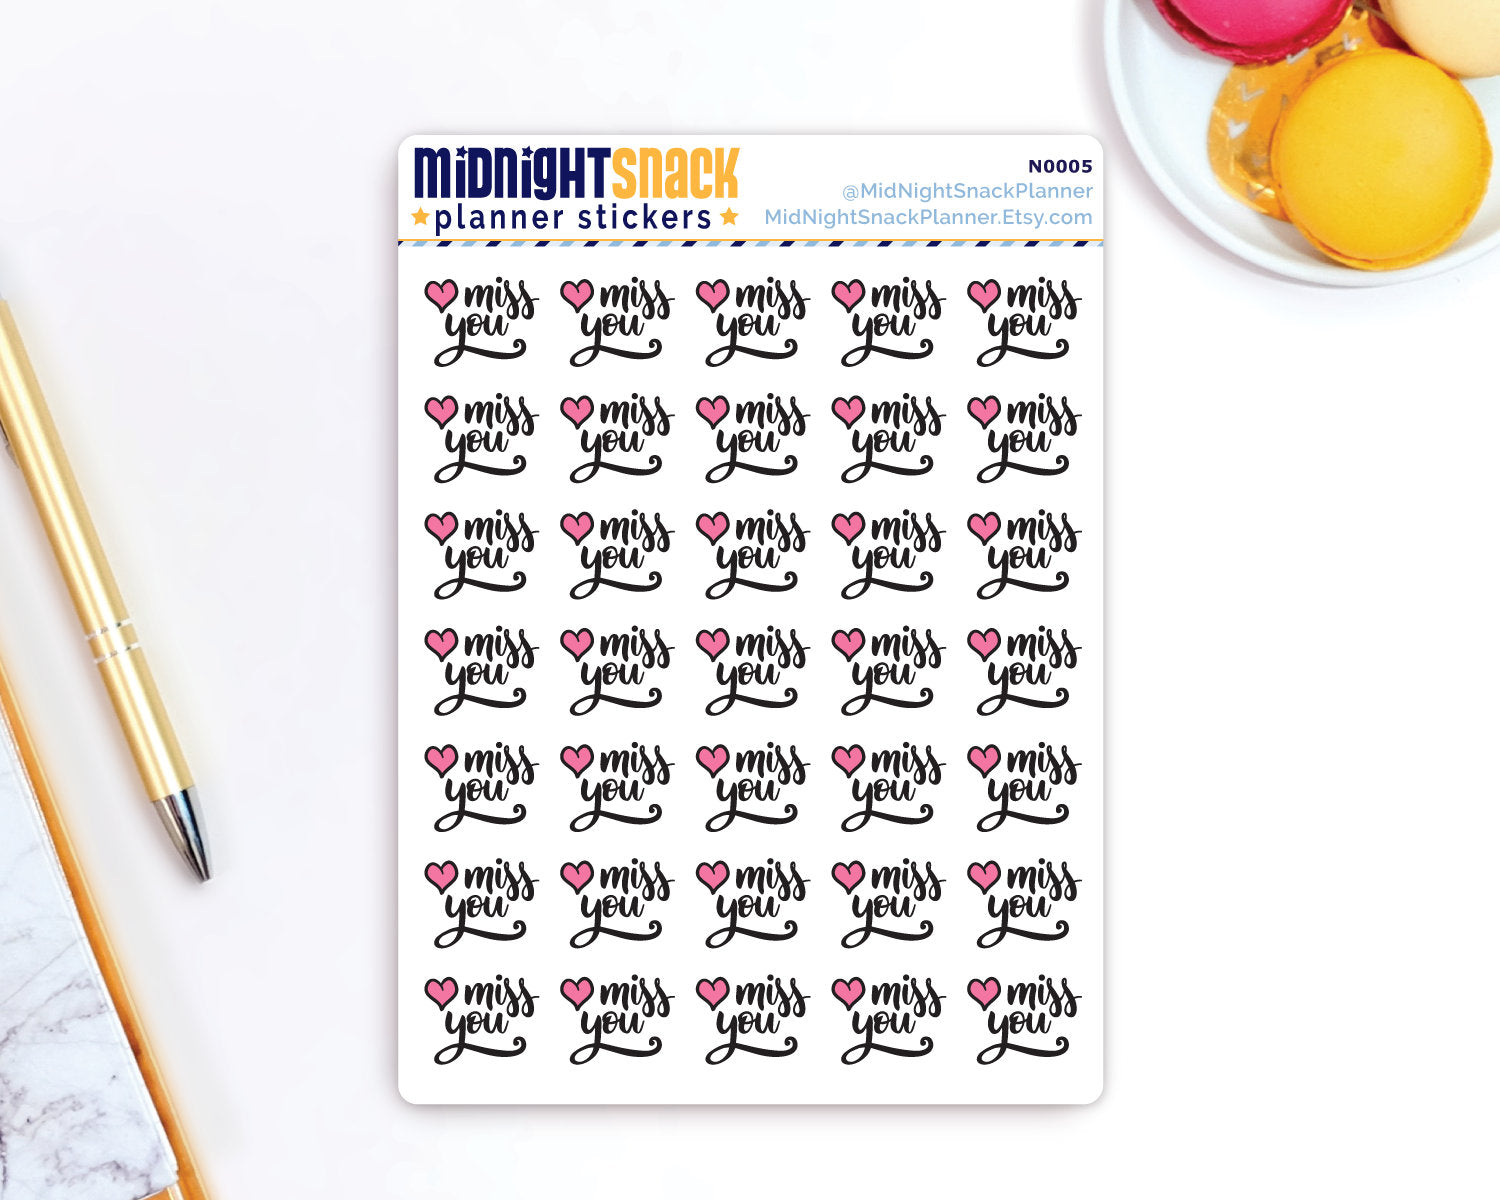 Miss You Planner Stickers Midnight Snack Planner